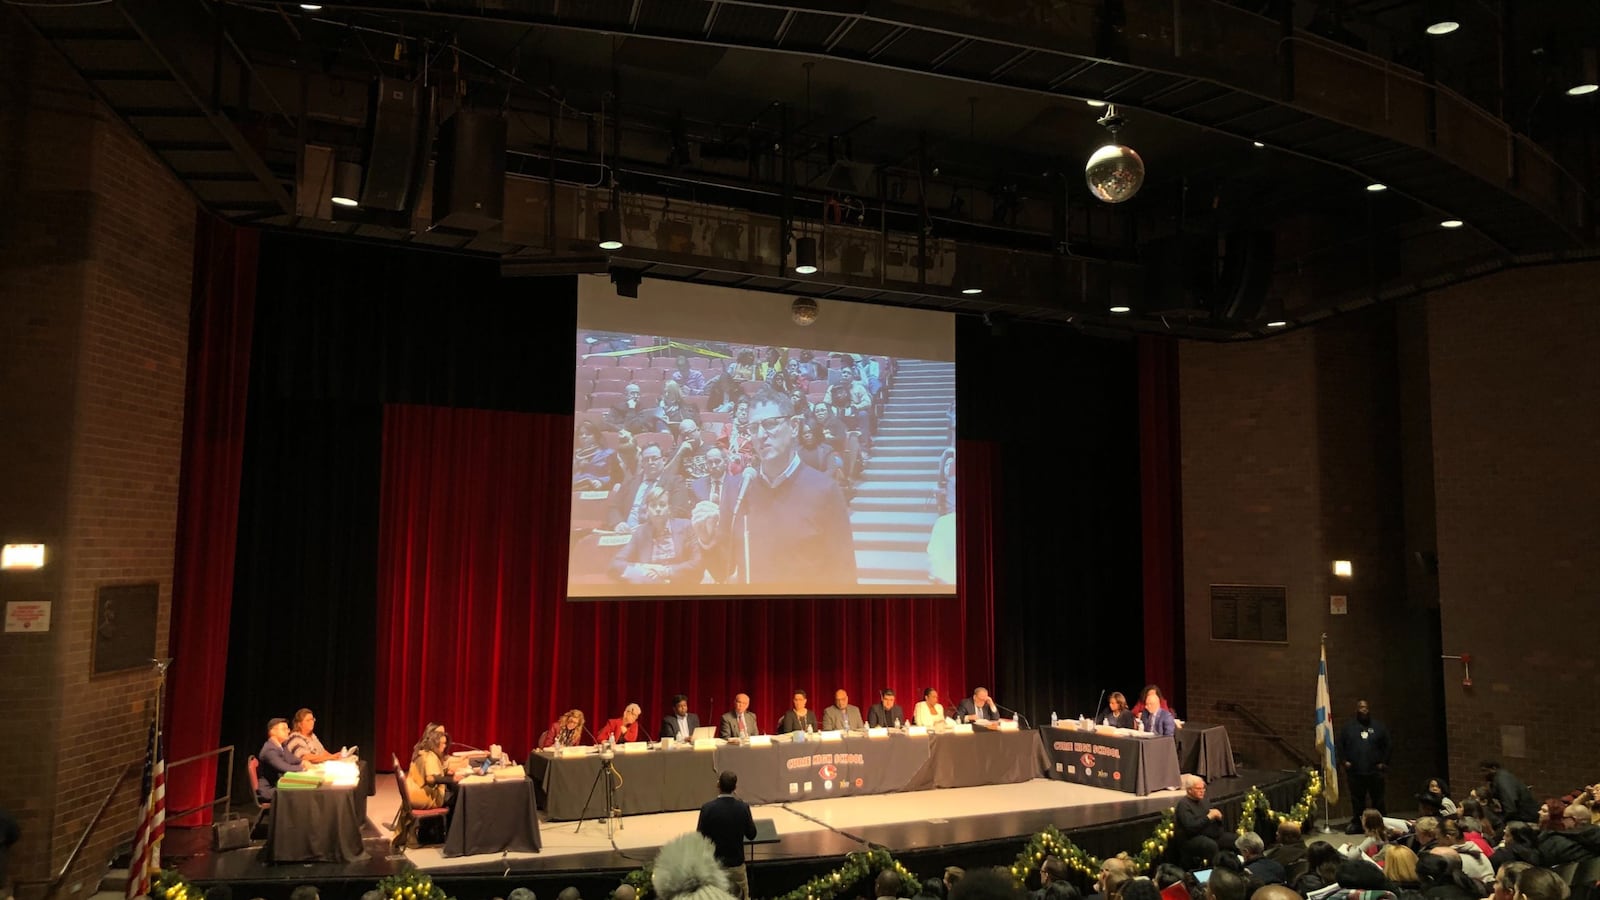 In a meeting at Curie High School, the Chicago school board on Wednesday voted to close two charter schools for poor performance.